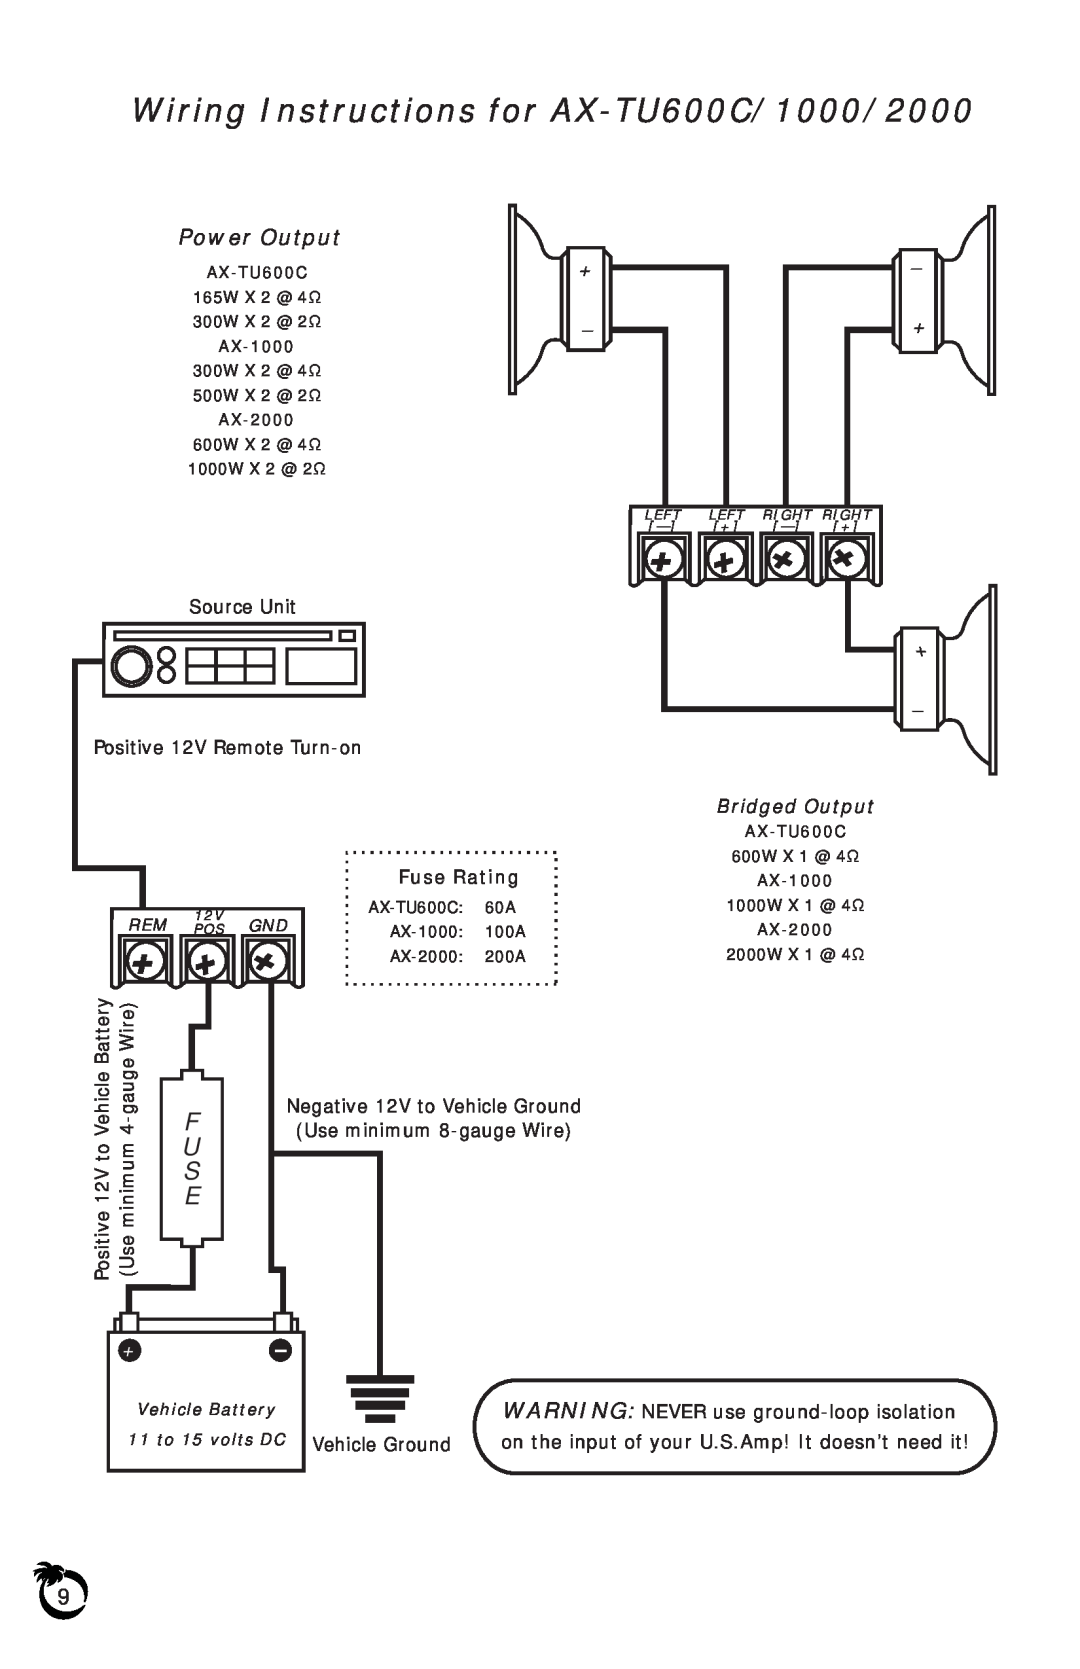 US Amps Wiring Instructions for AX-TU600C/1000/2000, F U S E, Power Output, + Bridged Output, Fuse Rating, AX-1000 